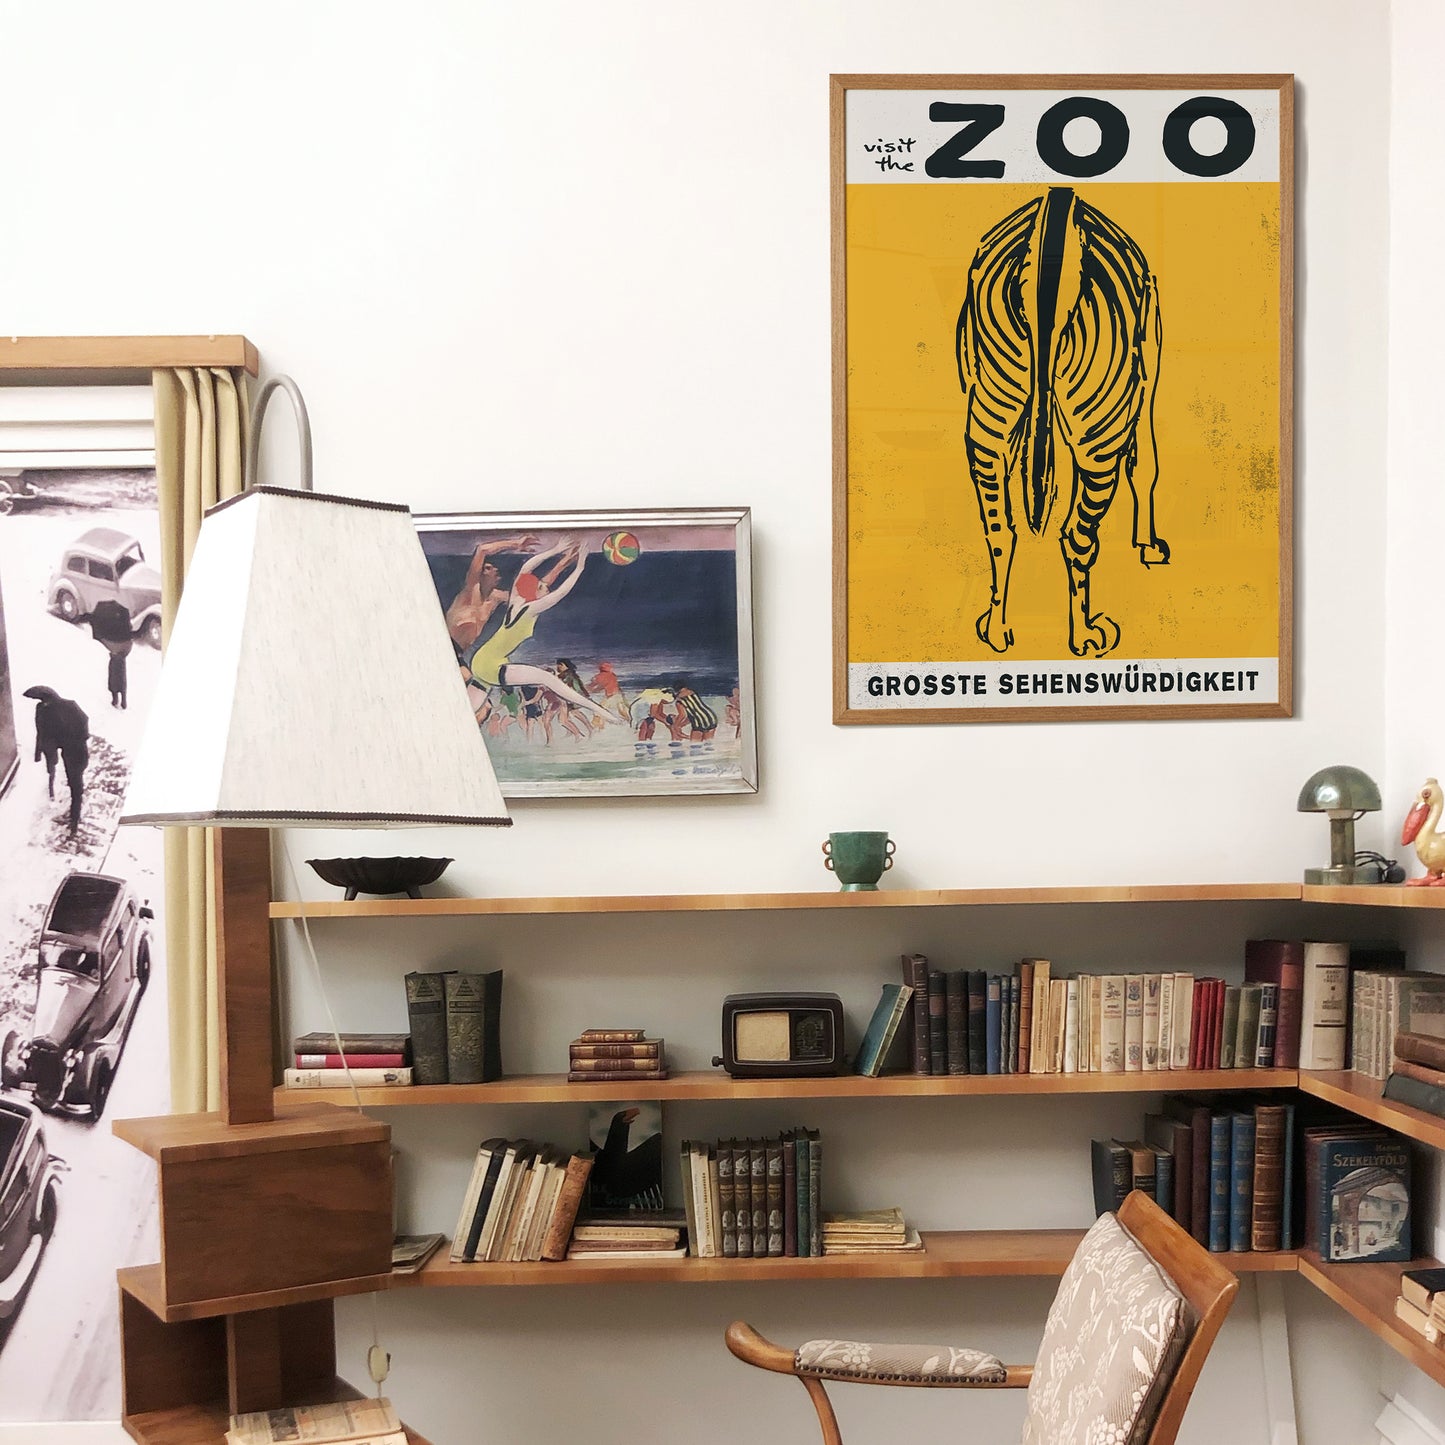 Visit the ZOO Poster